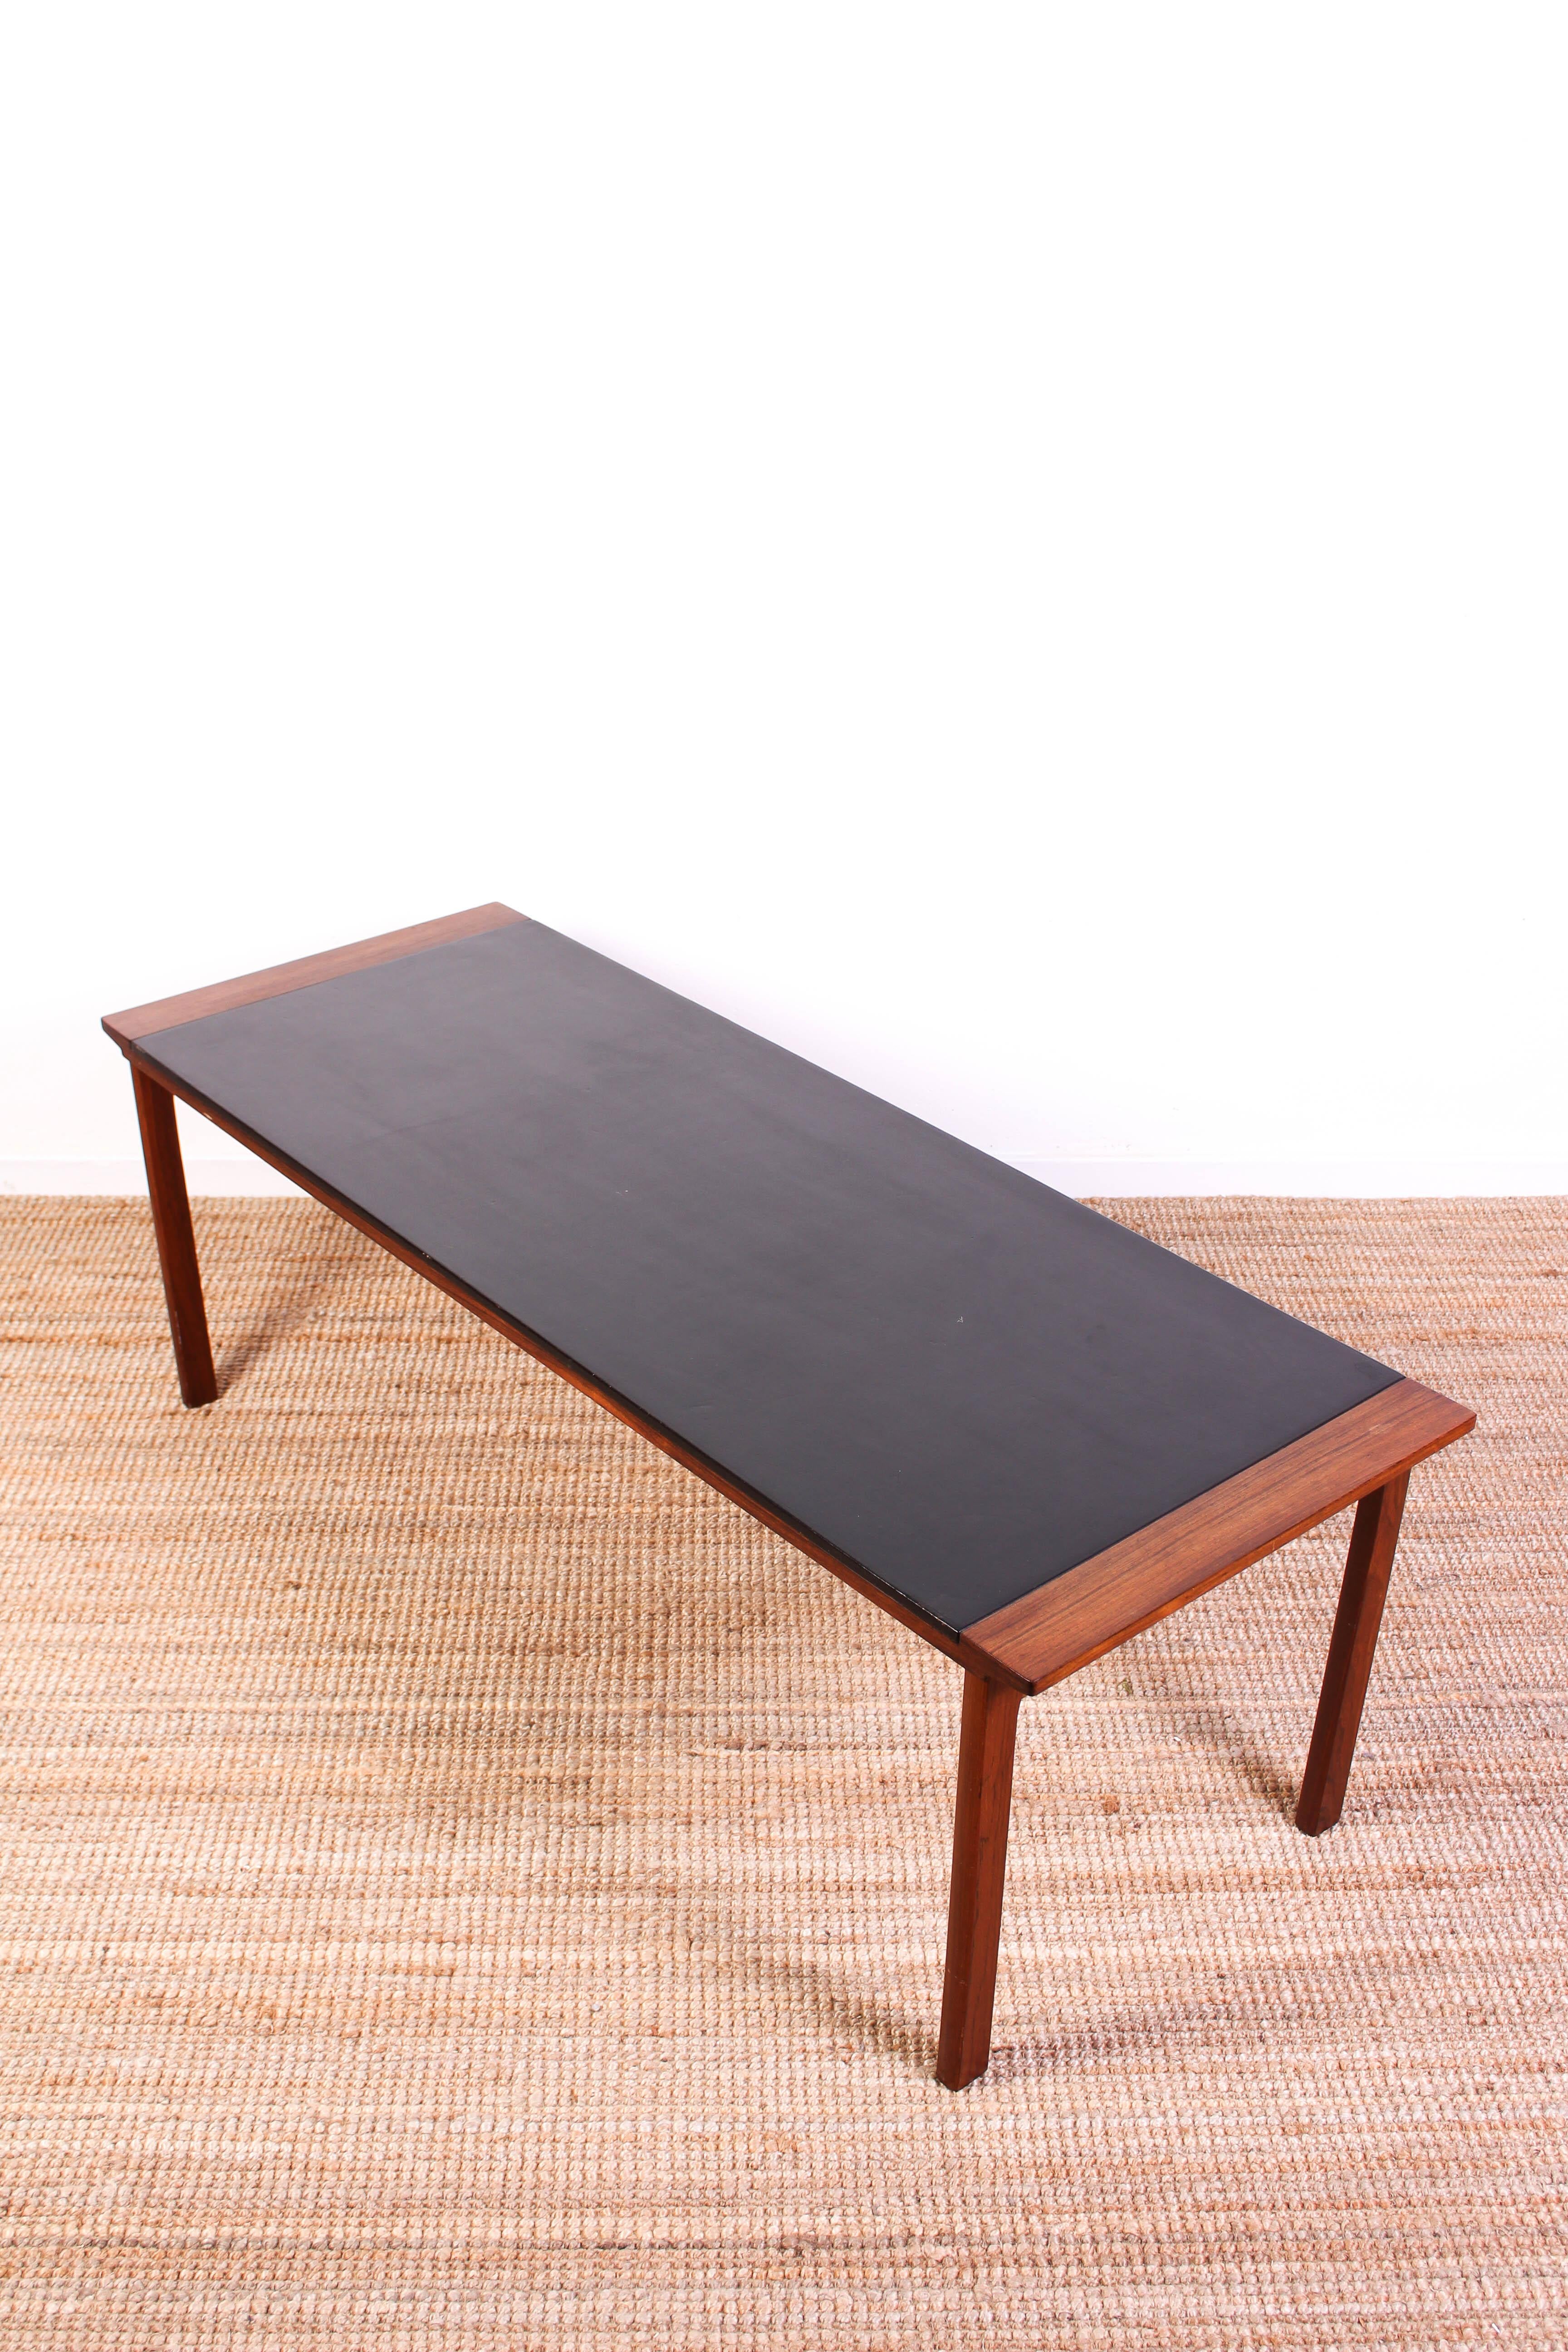 Mid-20th Century Midcentury Danish Rosewood Coffee Table with Leather Top For Sale